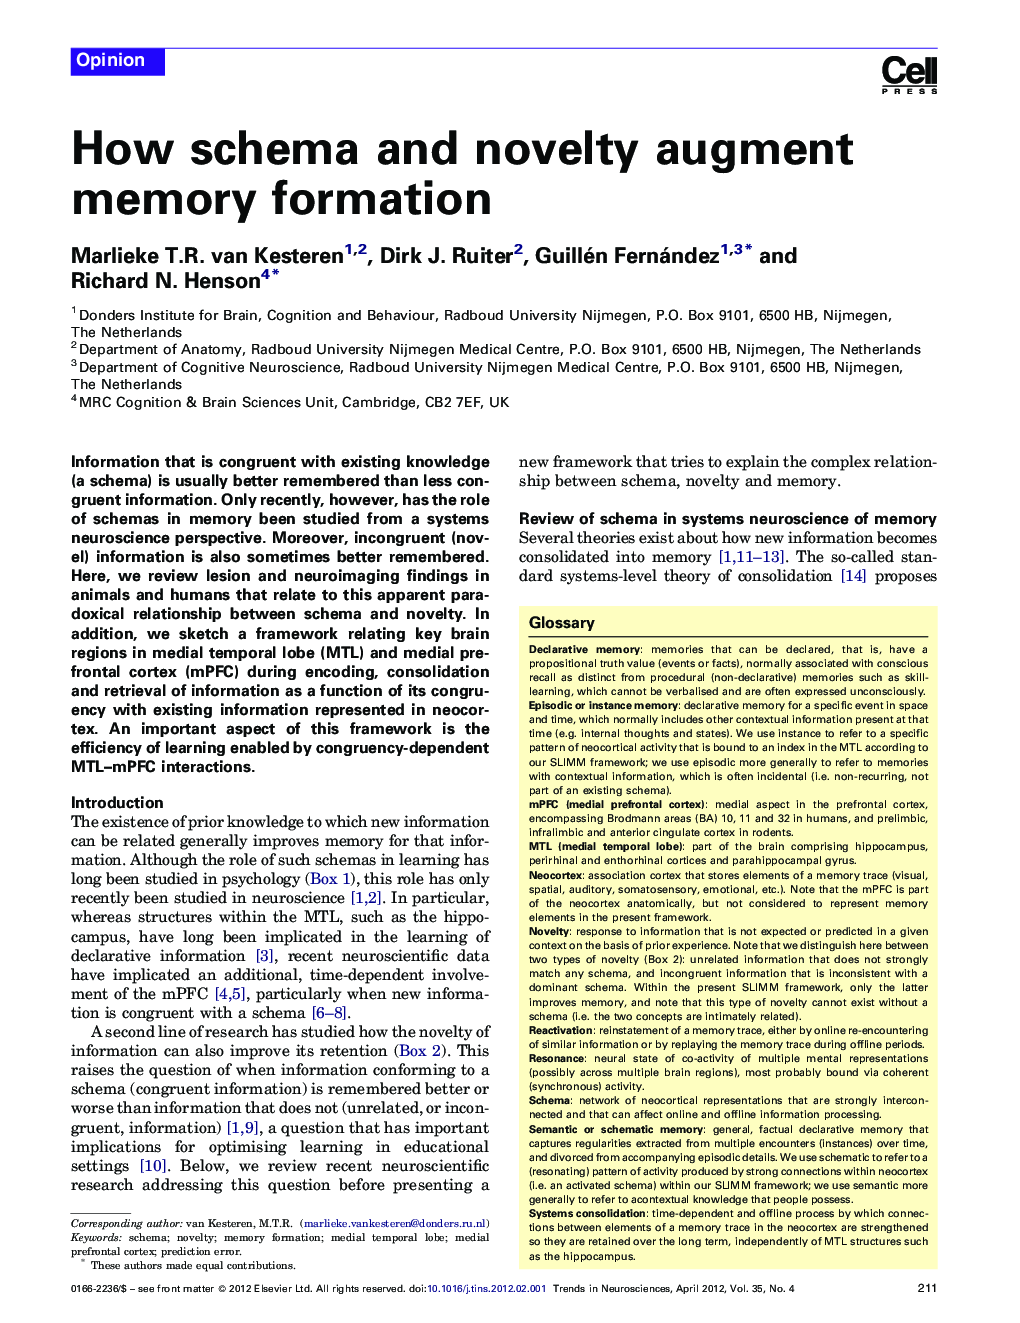 How schema and novelty augment memory formation